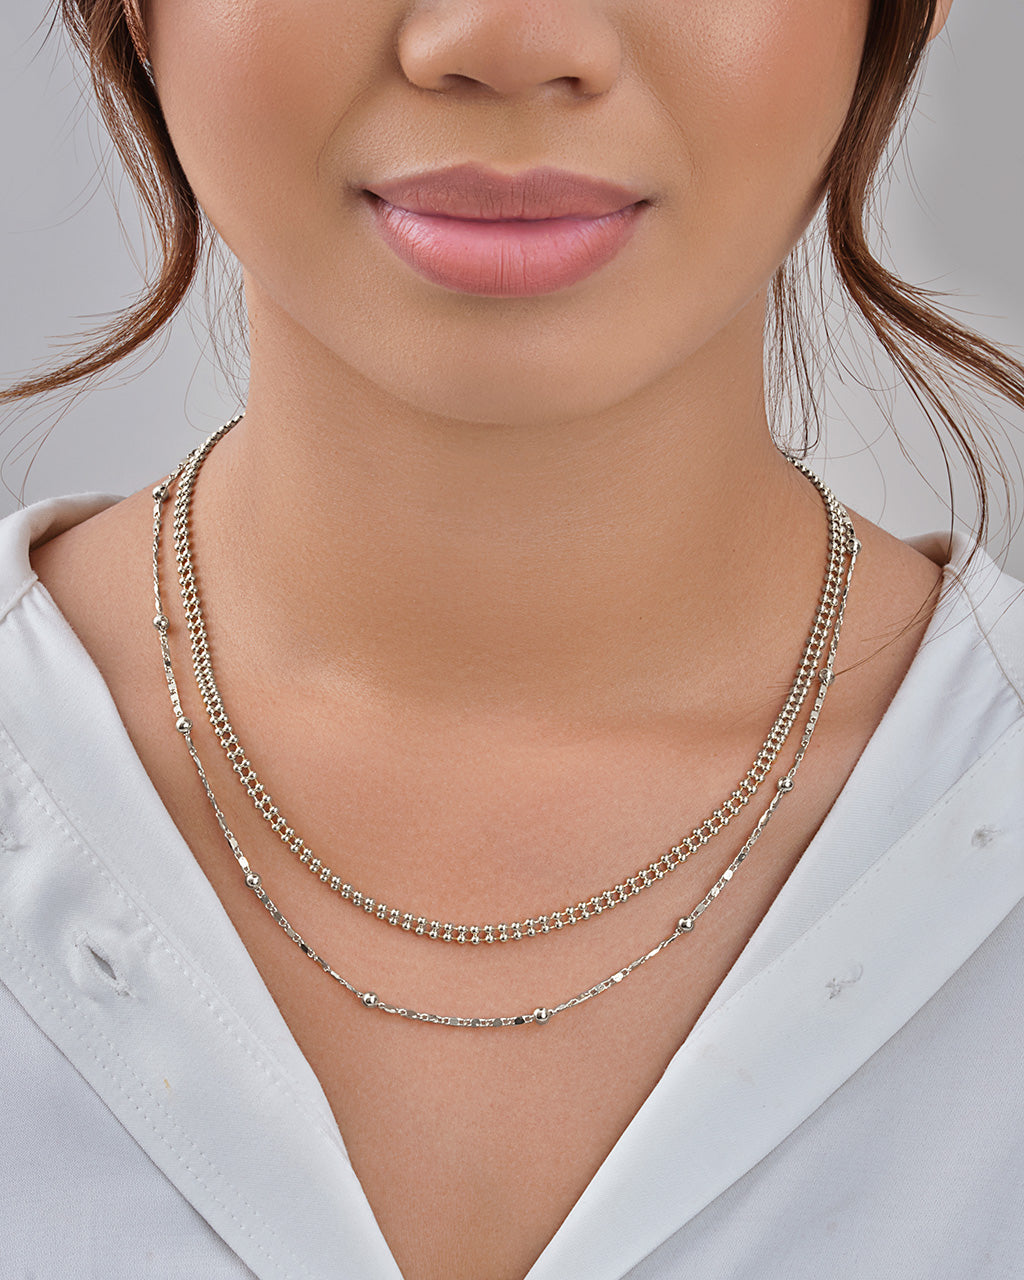 Shane Co. - Layering pearls with chains is a trend we're here for. 👏 Shop  more looks